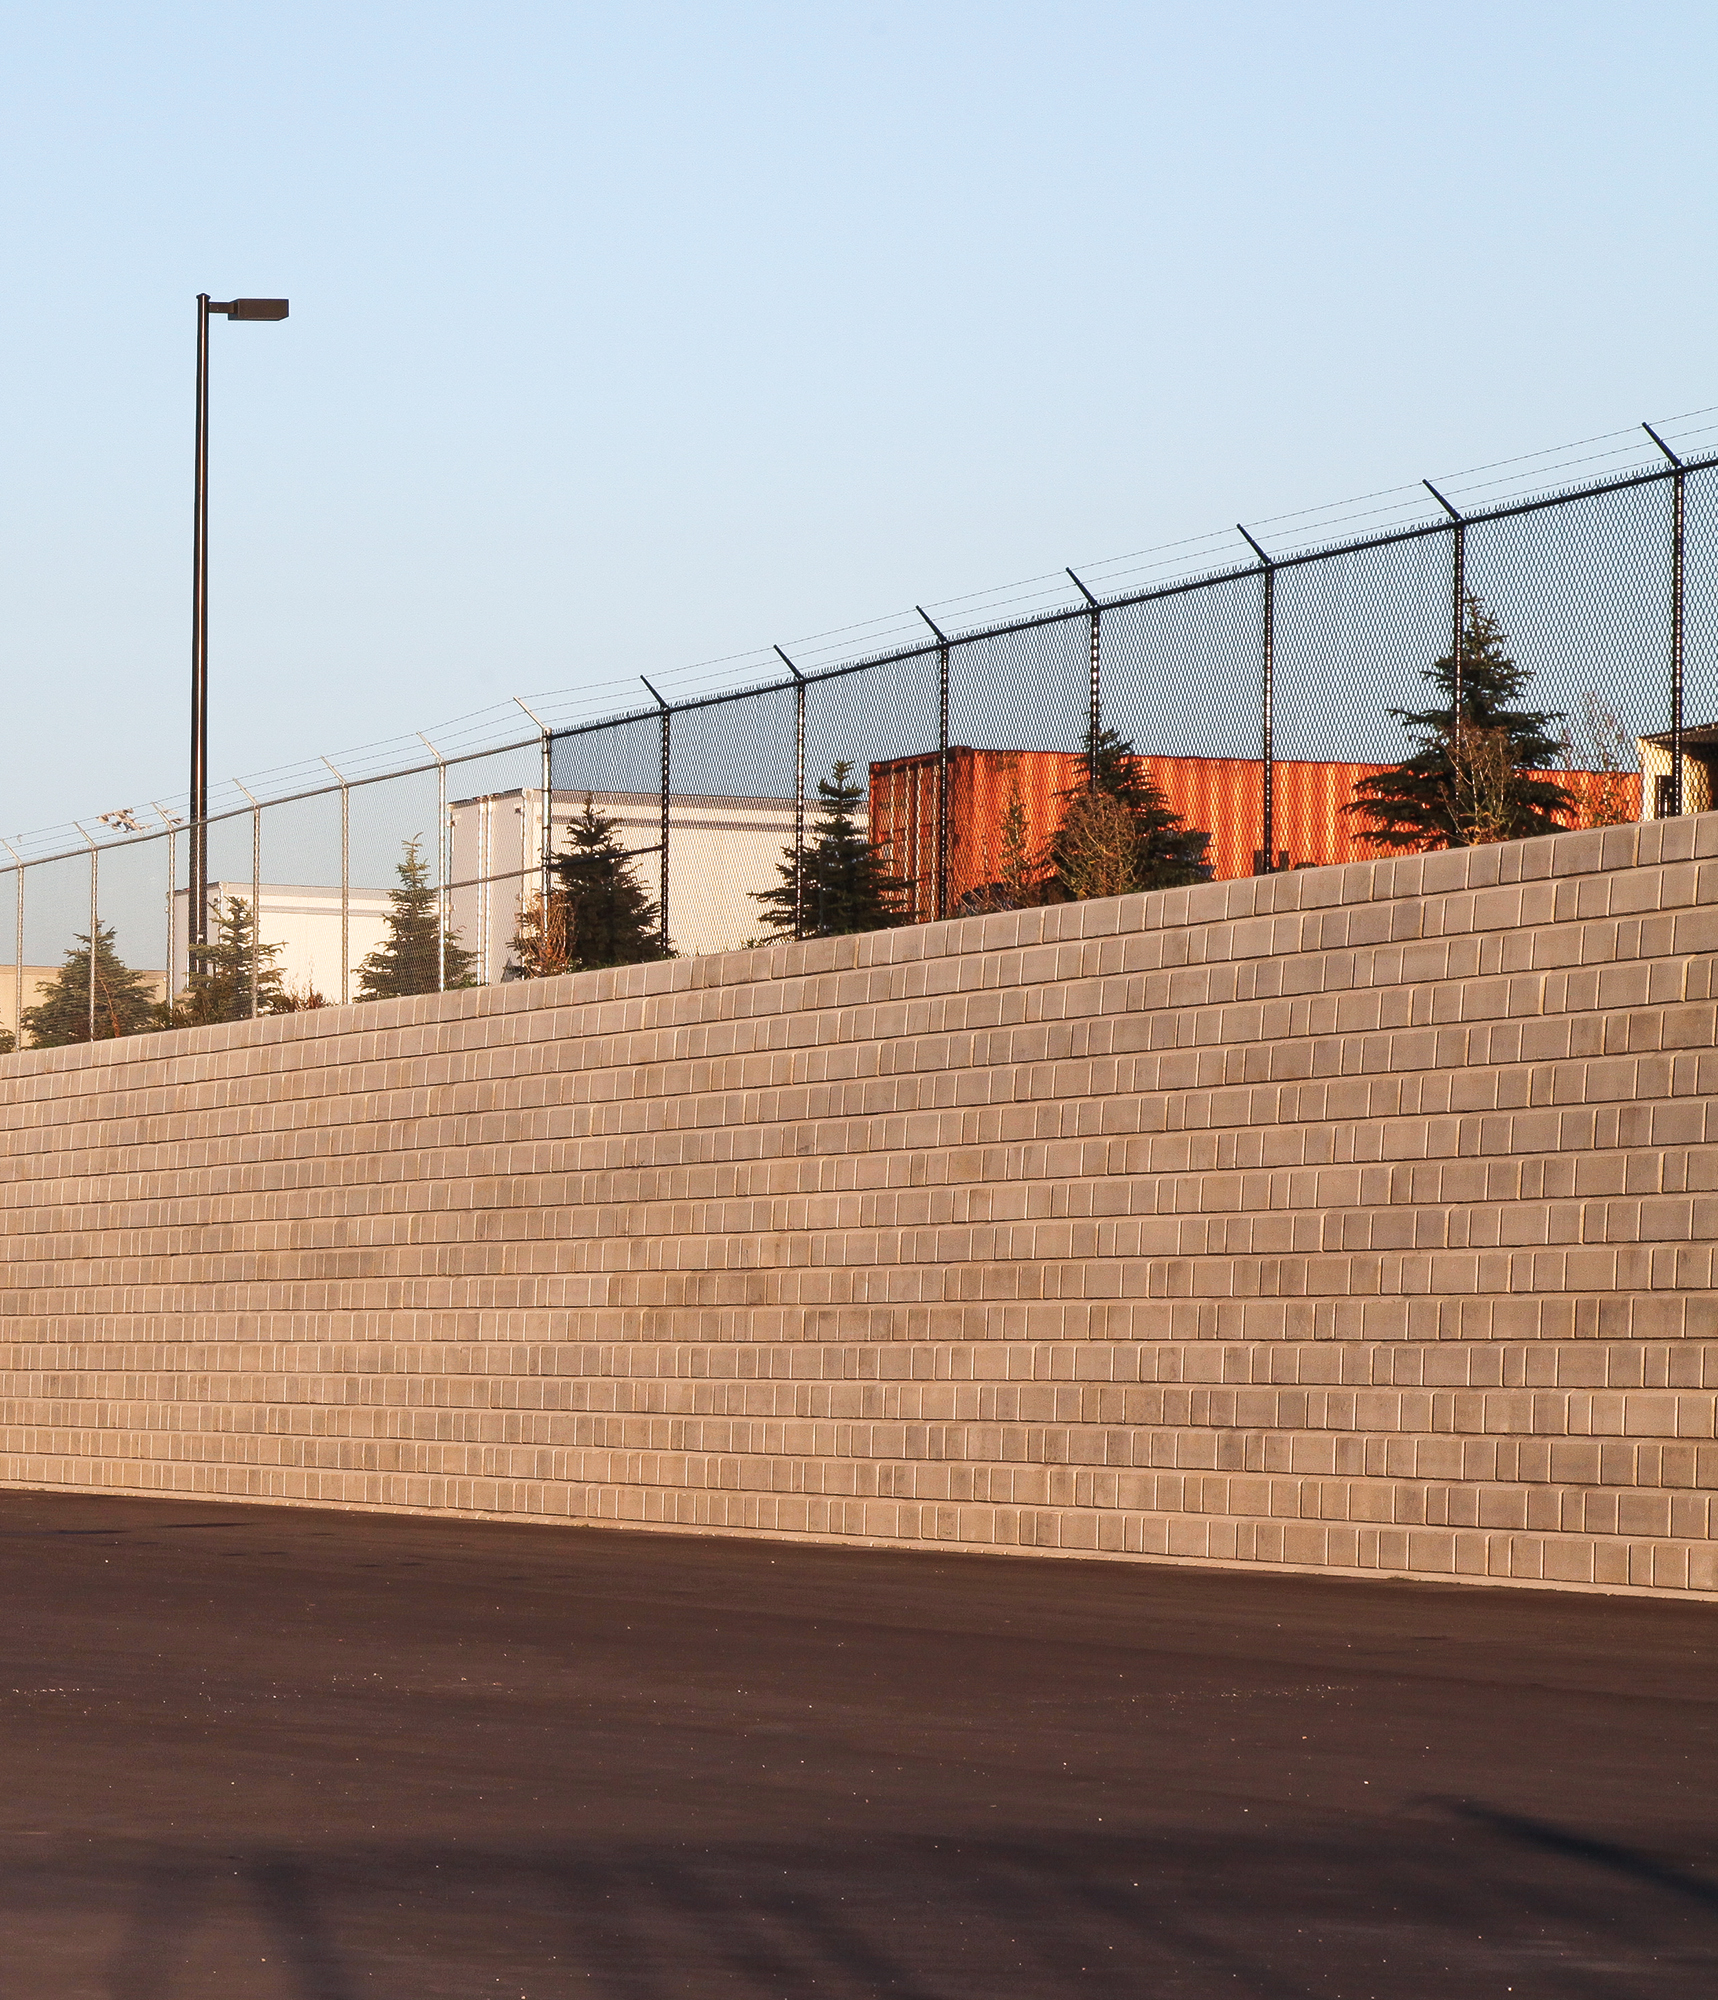 At the Home Depot Warehouse, a sizable DuraHold retaining wall and chain-link fence enclose an open parking area.